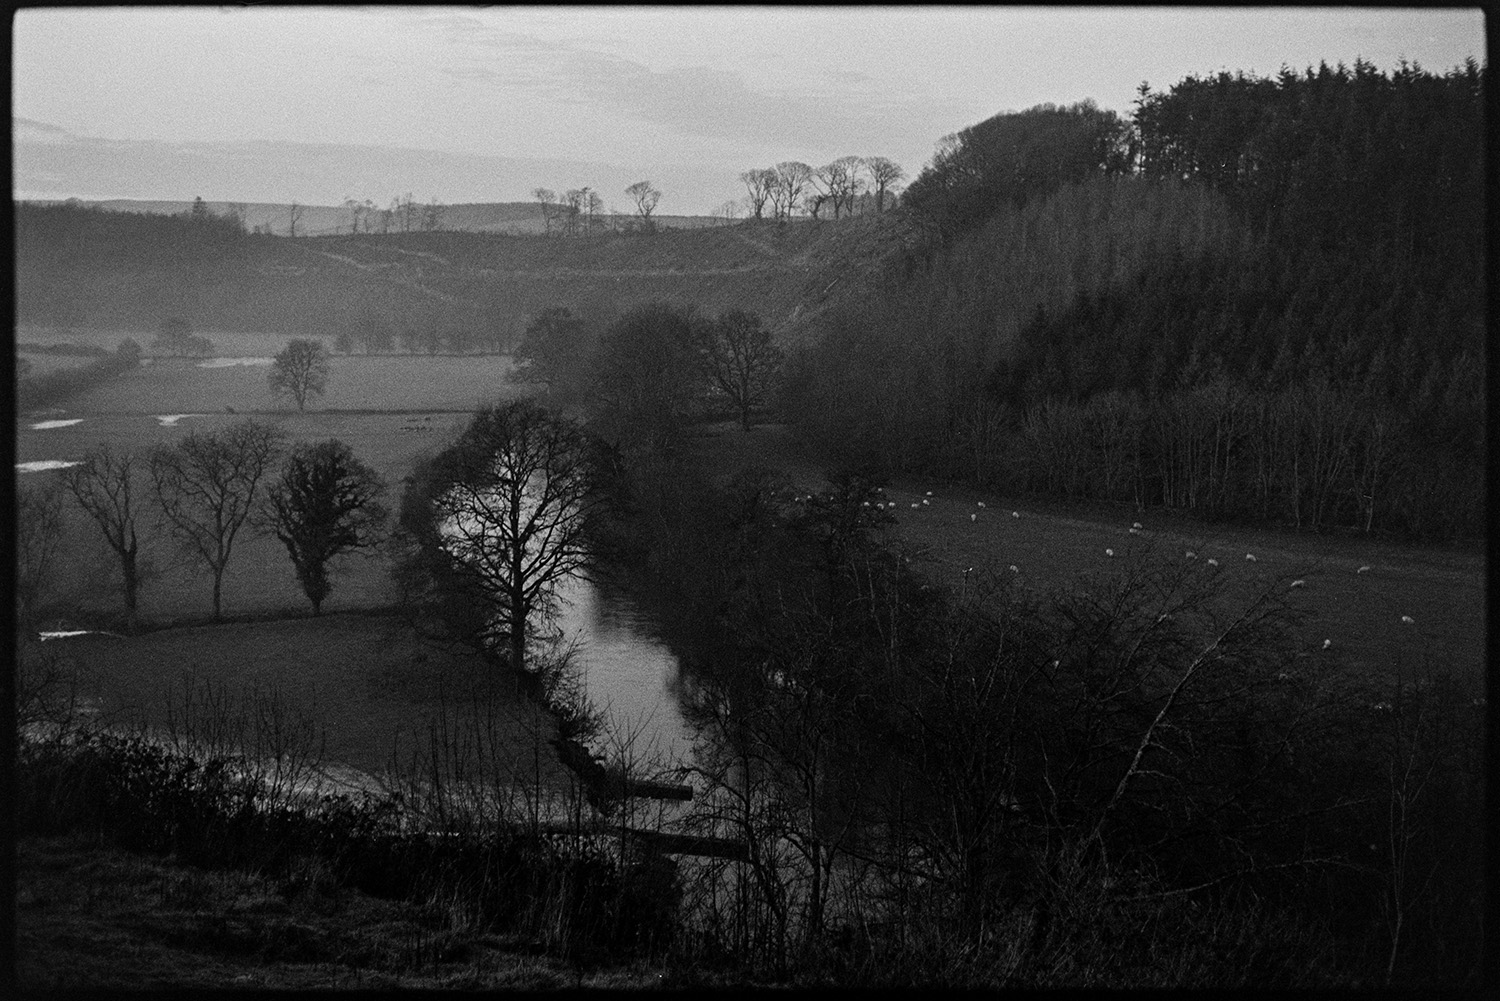 Landscape with river.
[A view from Brightley, Dolton showing the River Torridge, partially flooded fields, sheep grazing in a field and the surrounding countryside.]